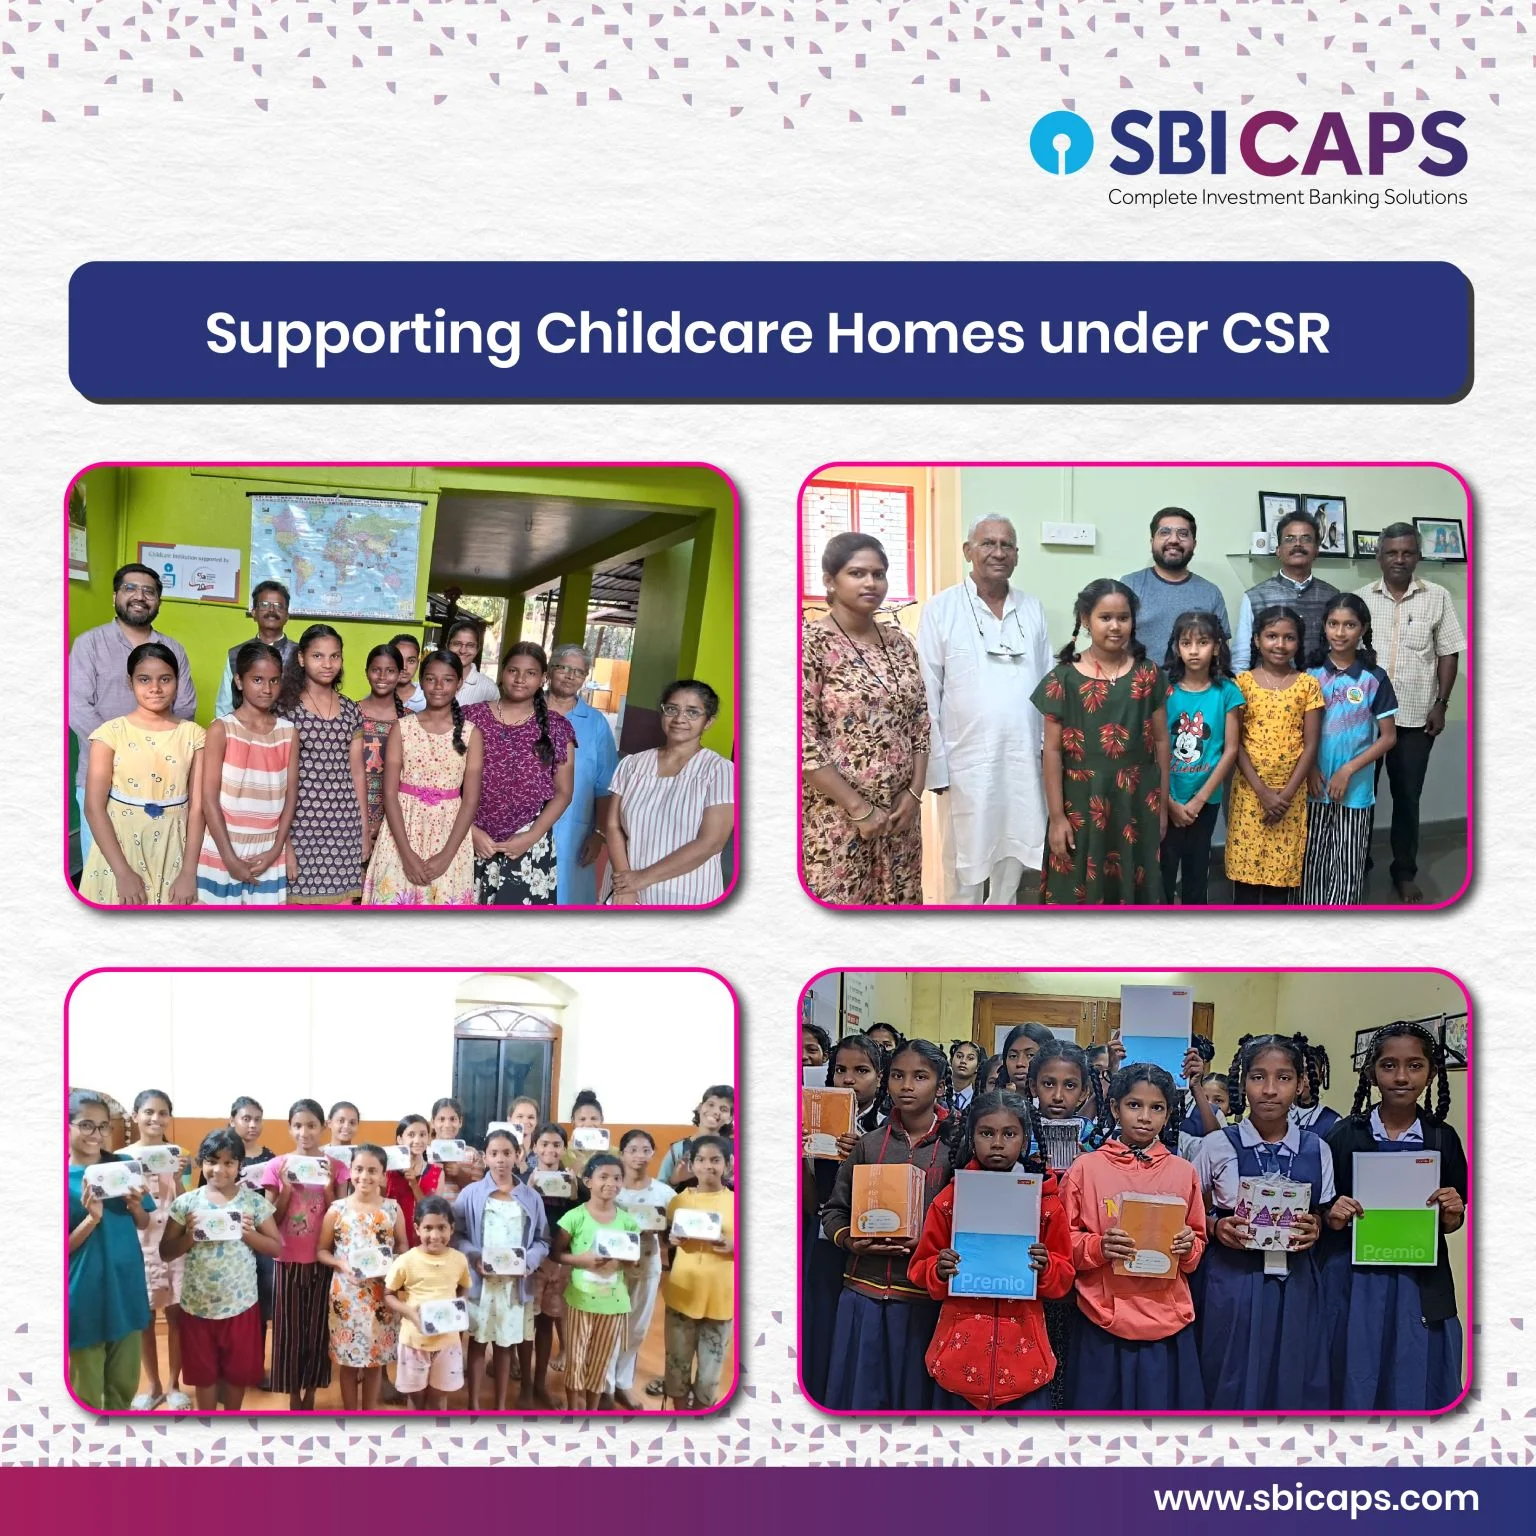 Supporting Childcare centers under CSR